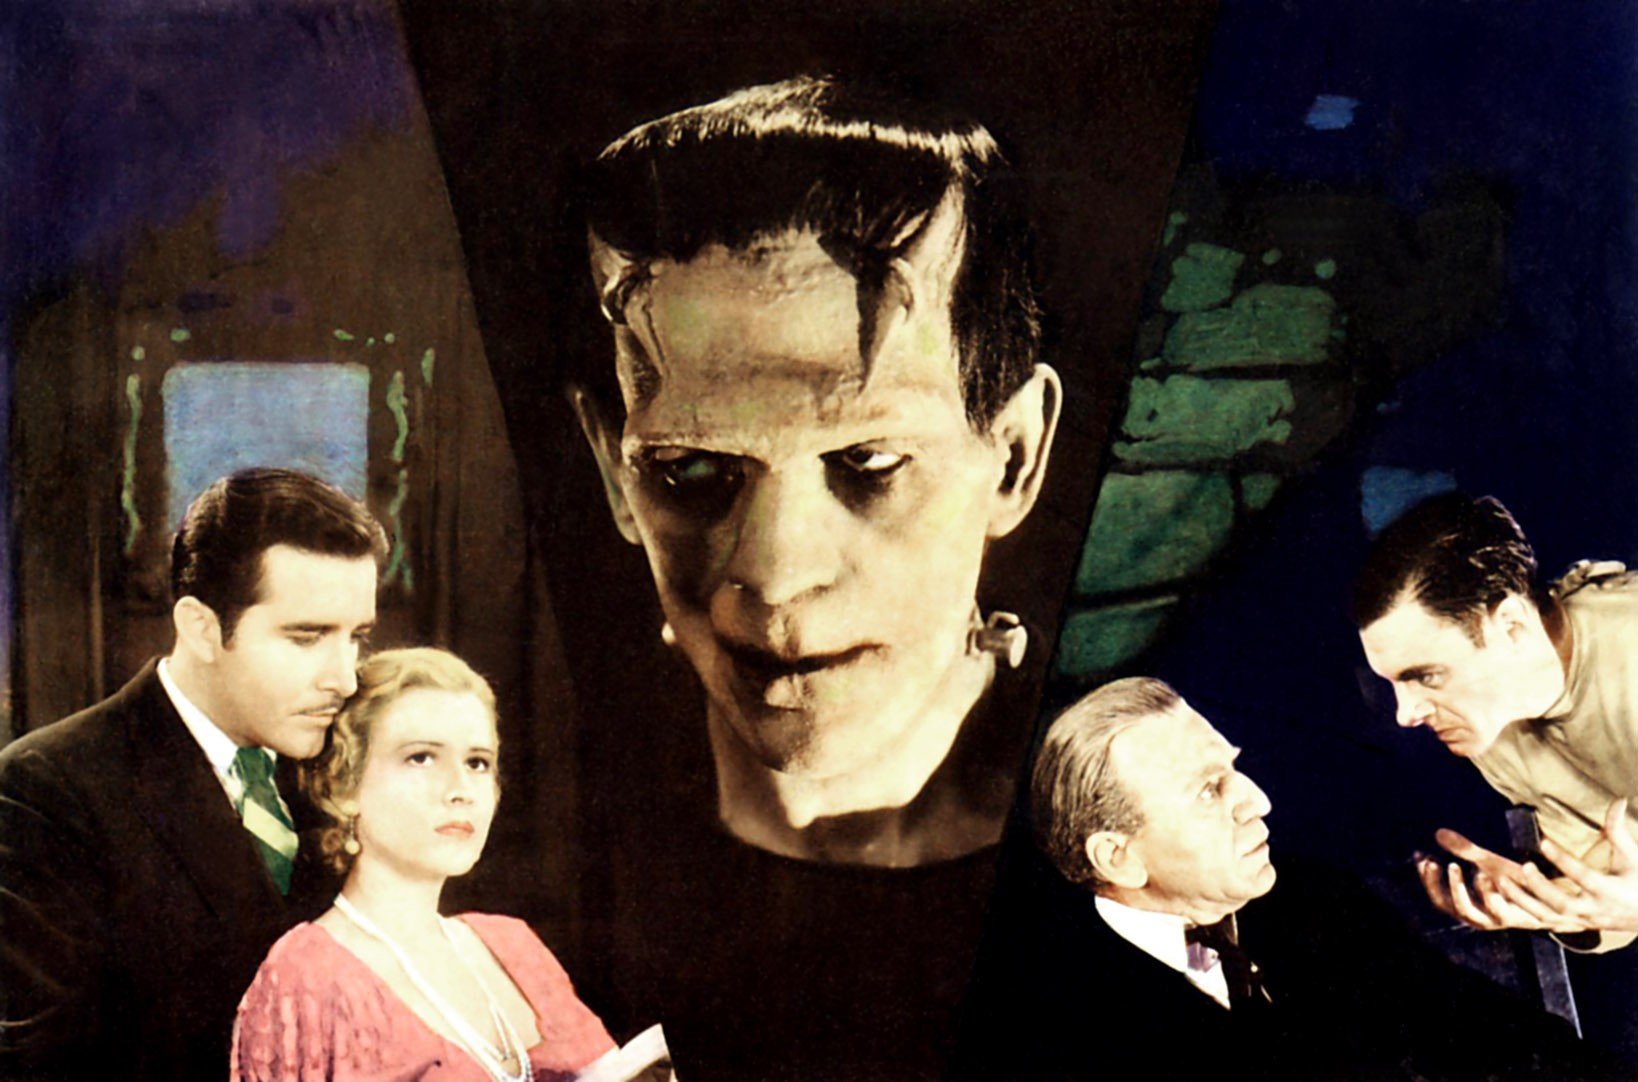 Frankenstein surrounded by people